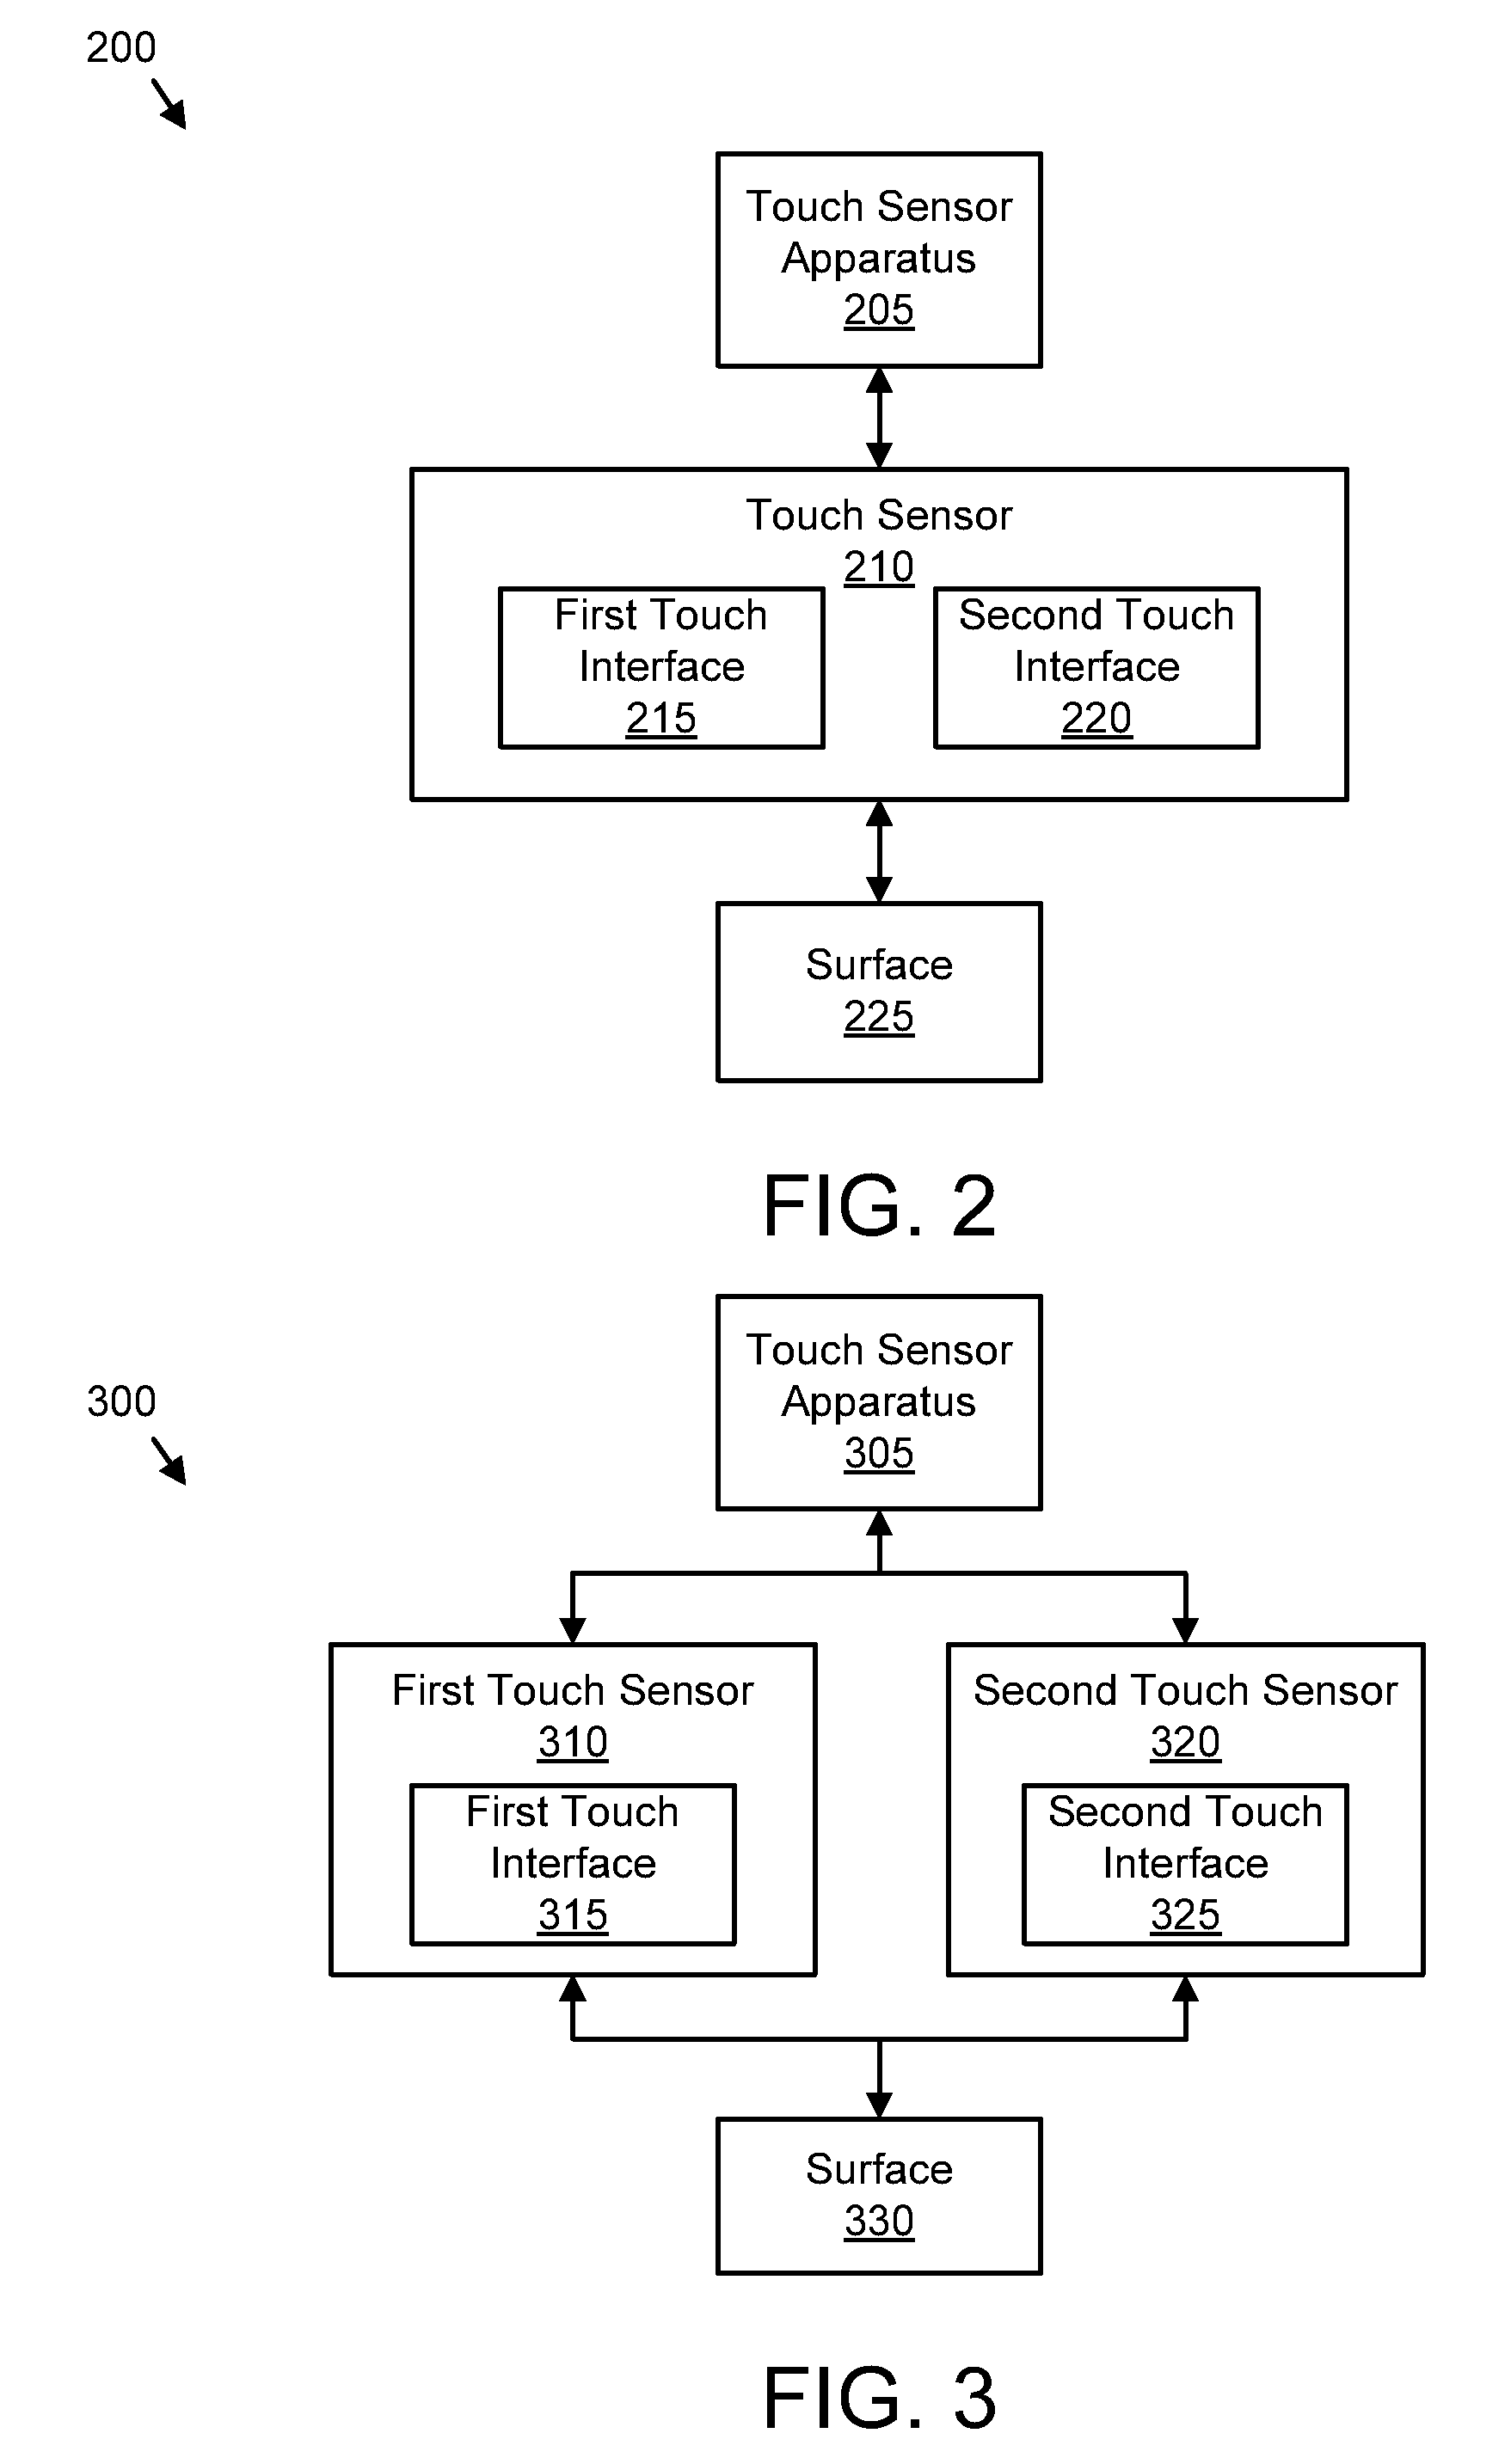 Detecting a touch event using a first touch interface and a second touch interface